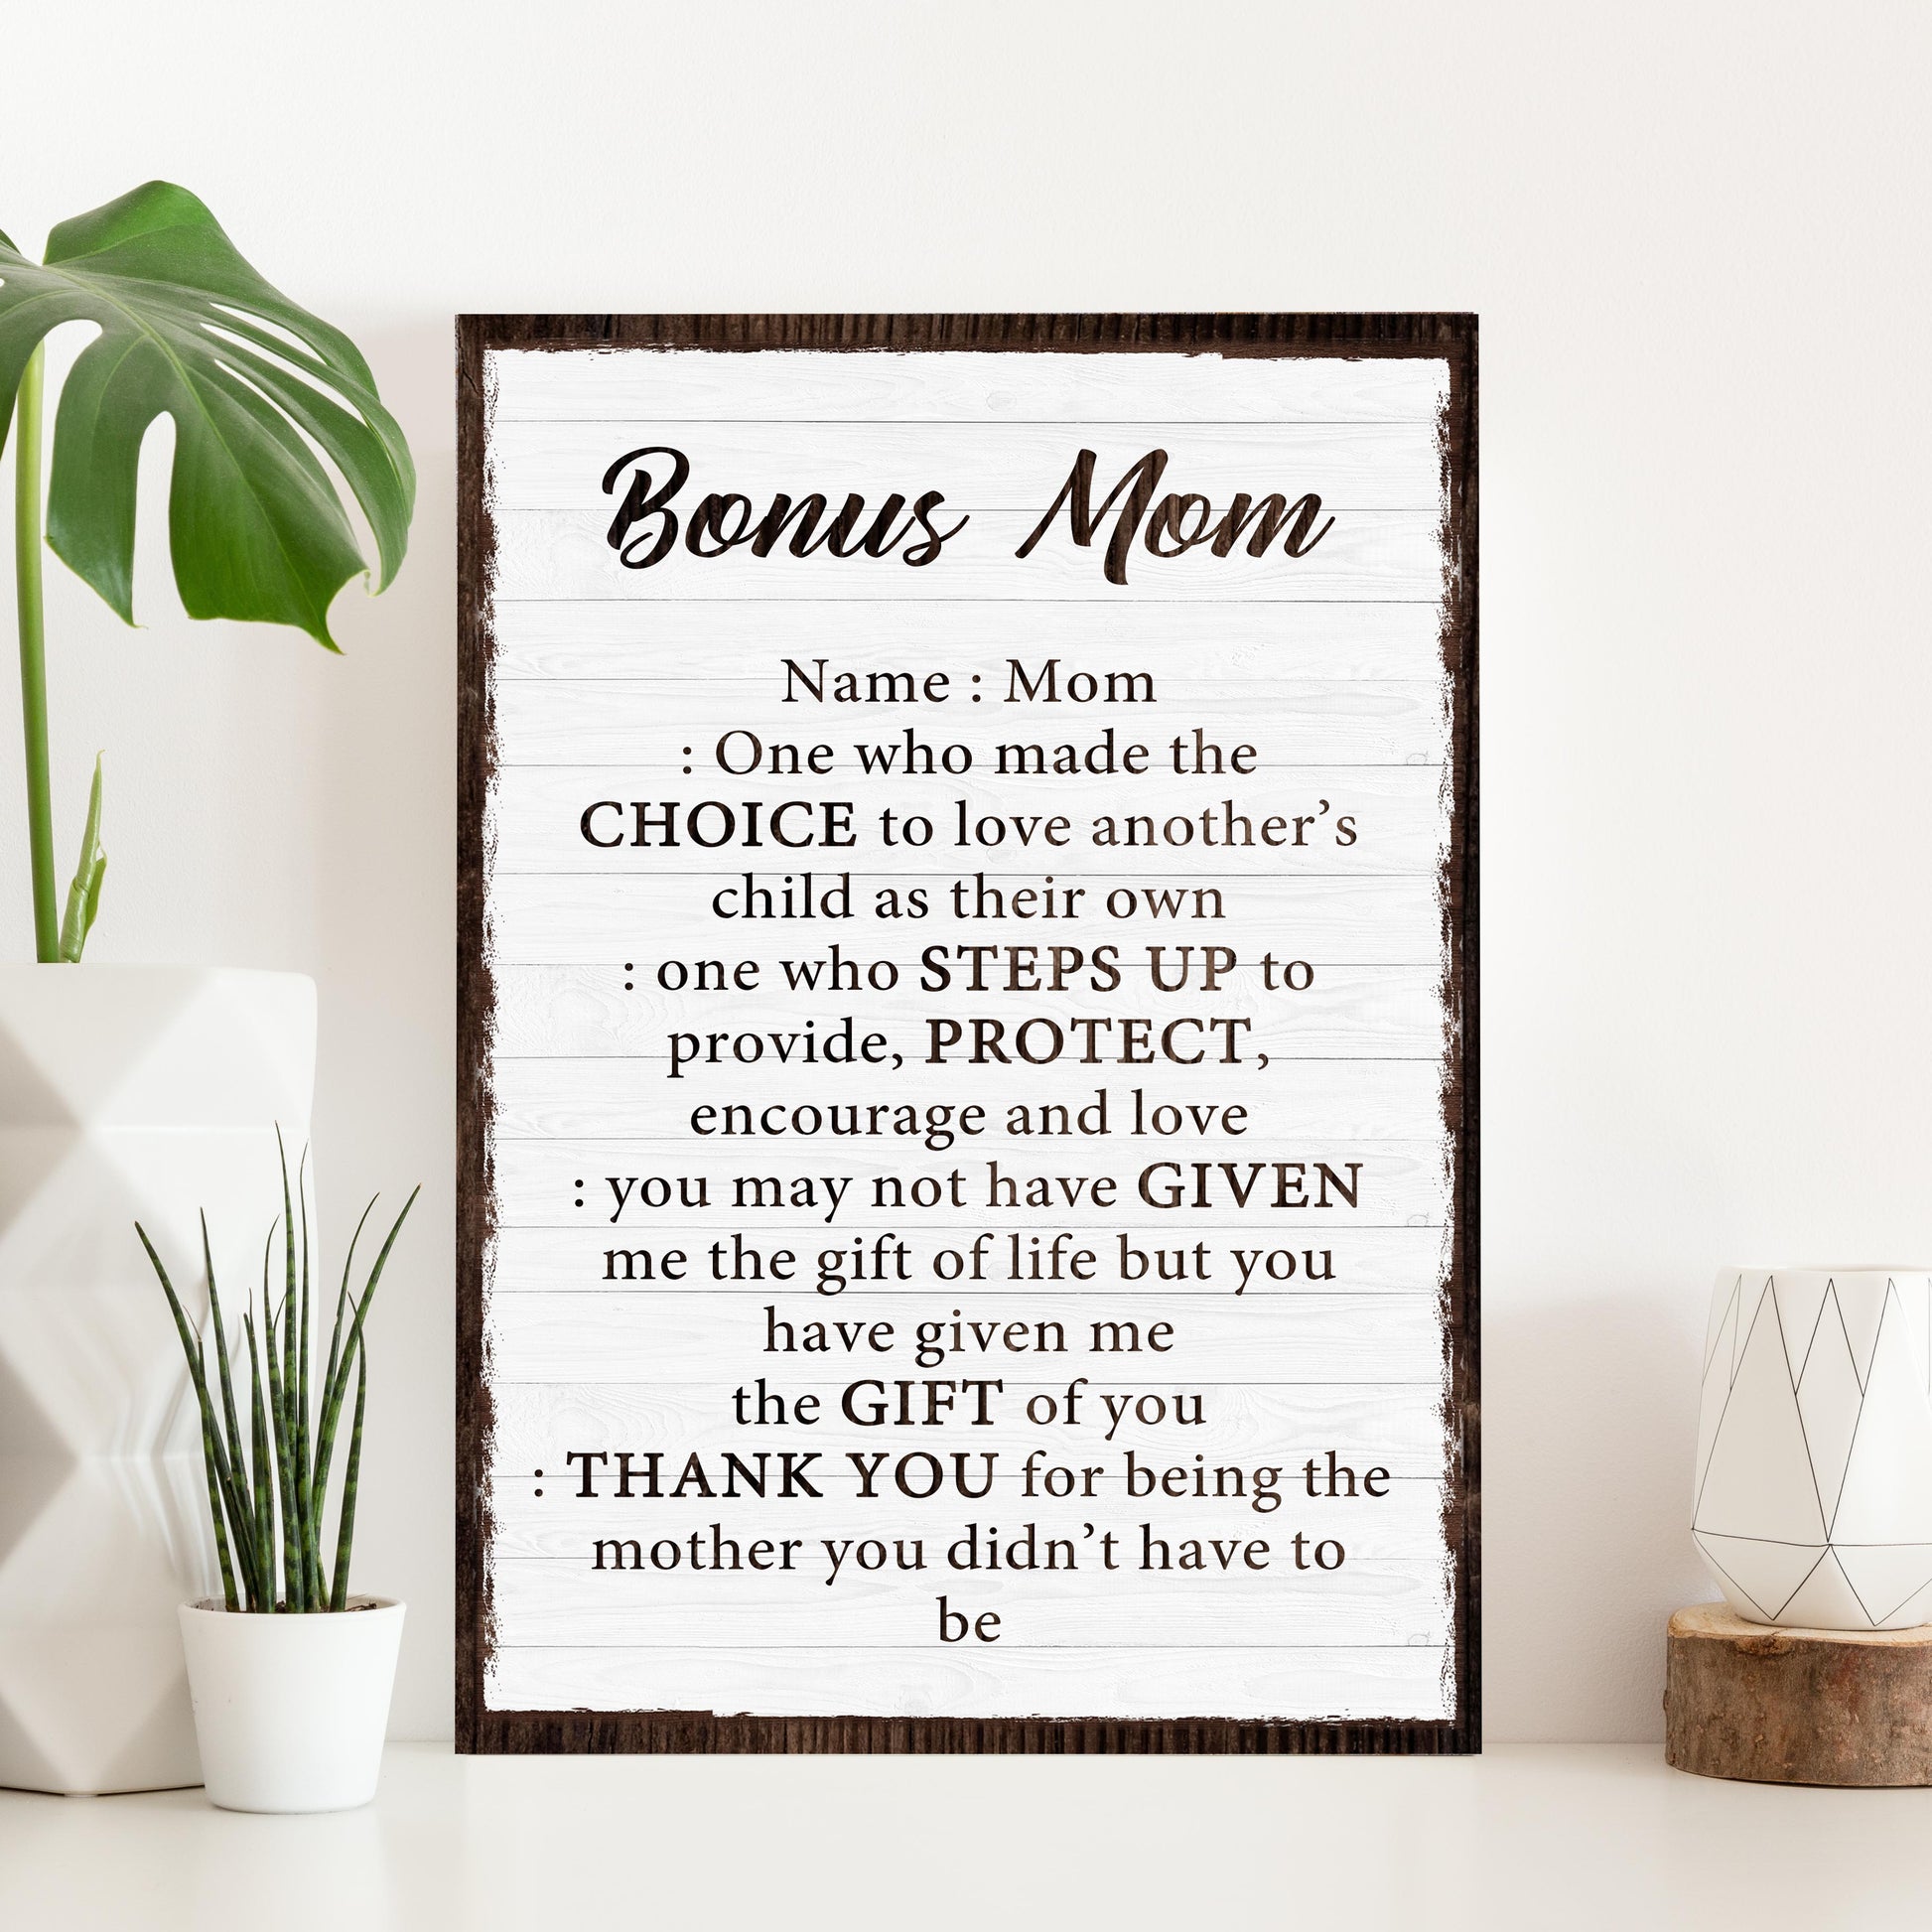 Bonus Mom Customized Sign II  - Image by Tailored Canvases